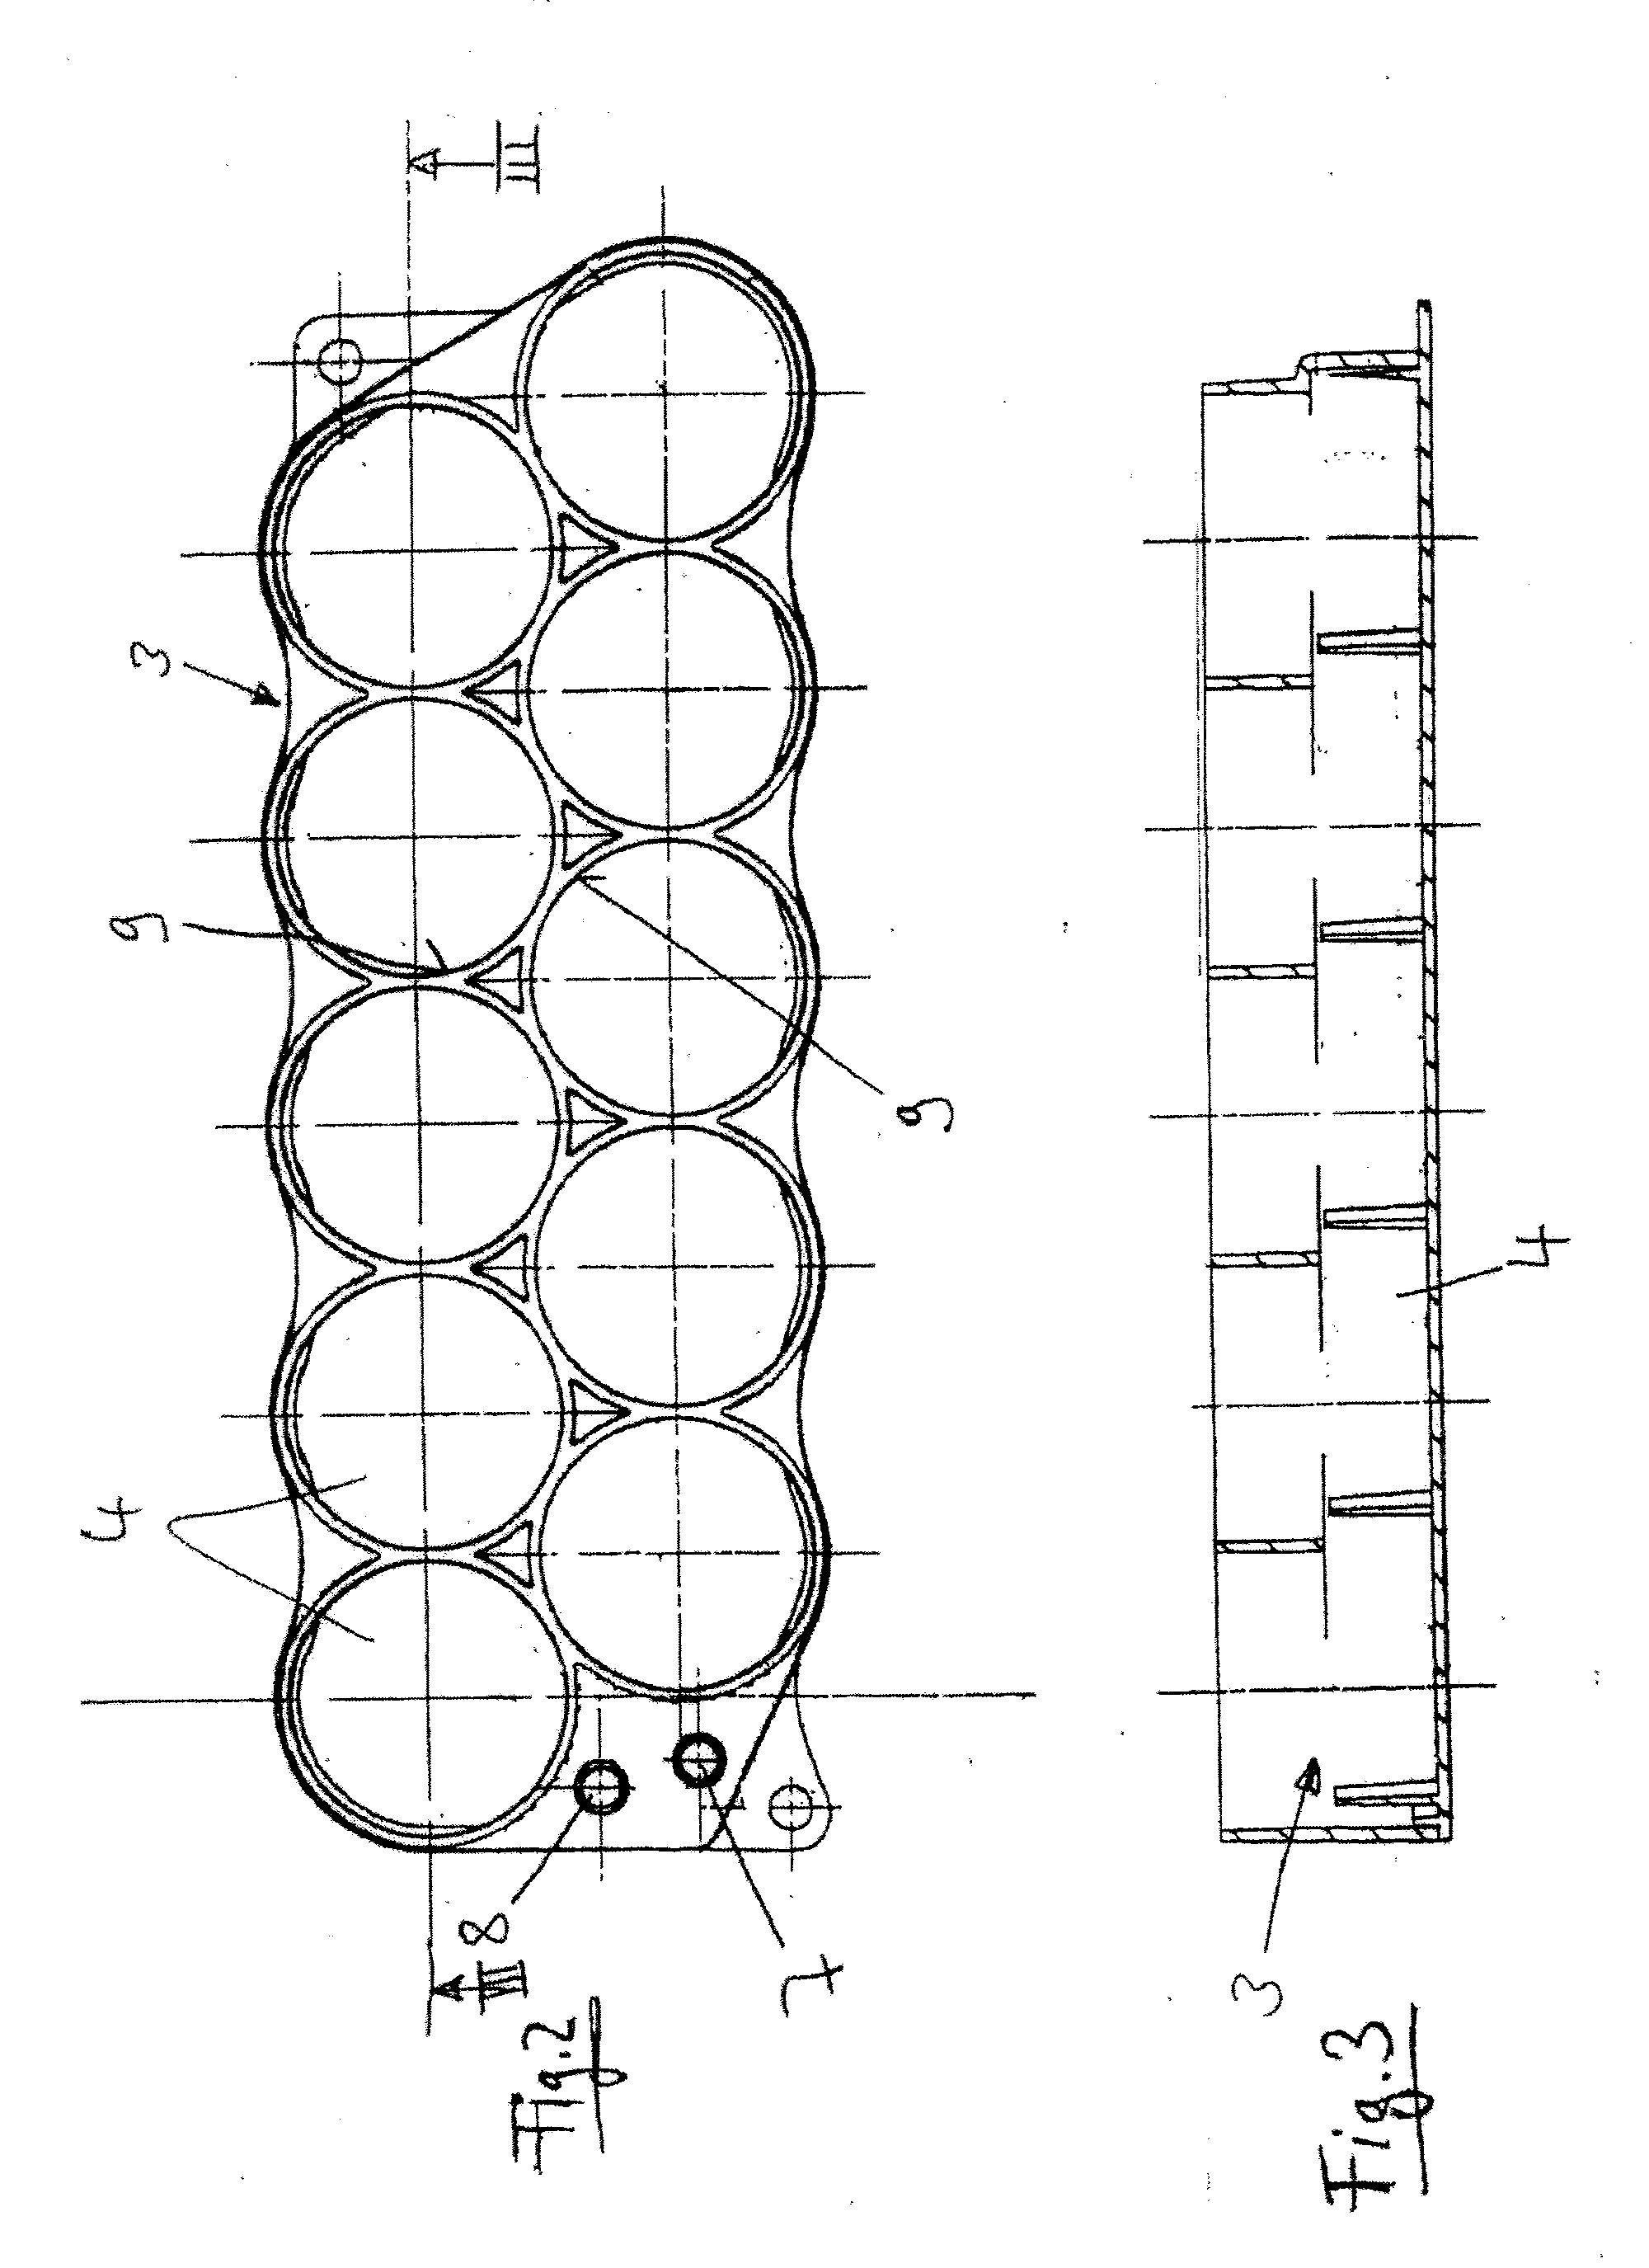 Liquid-Cooled Battery and Method for Operating Such a Battery